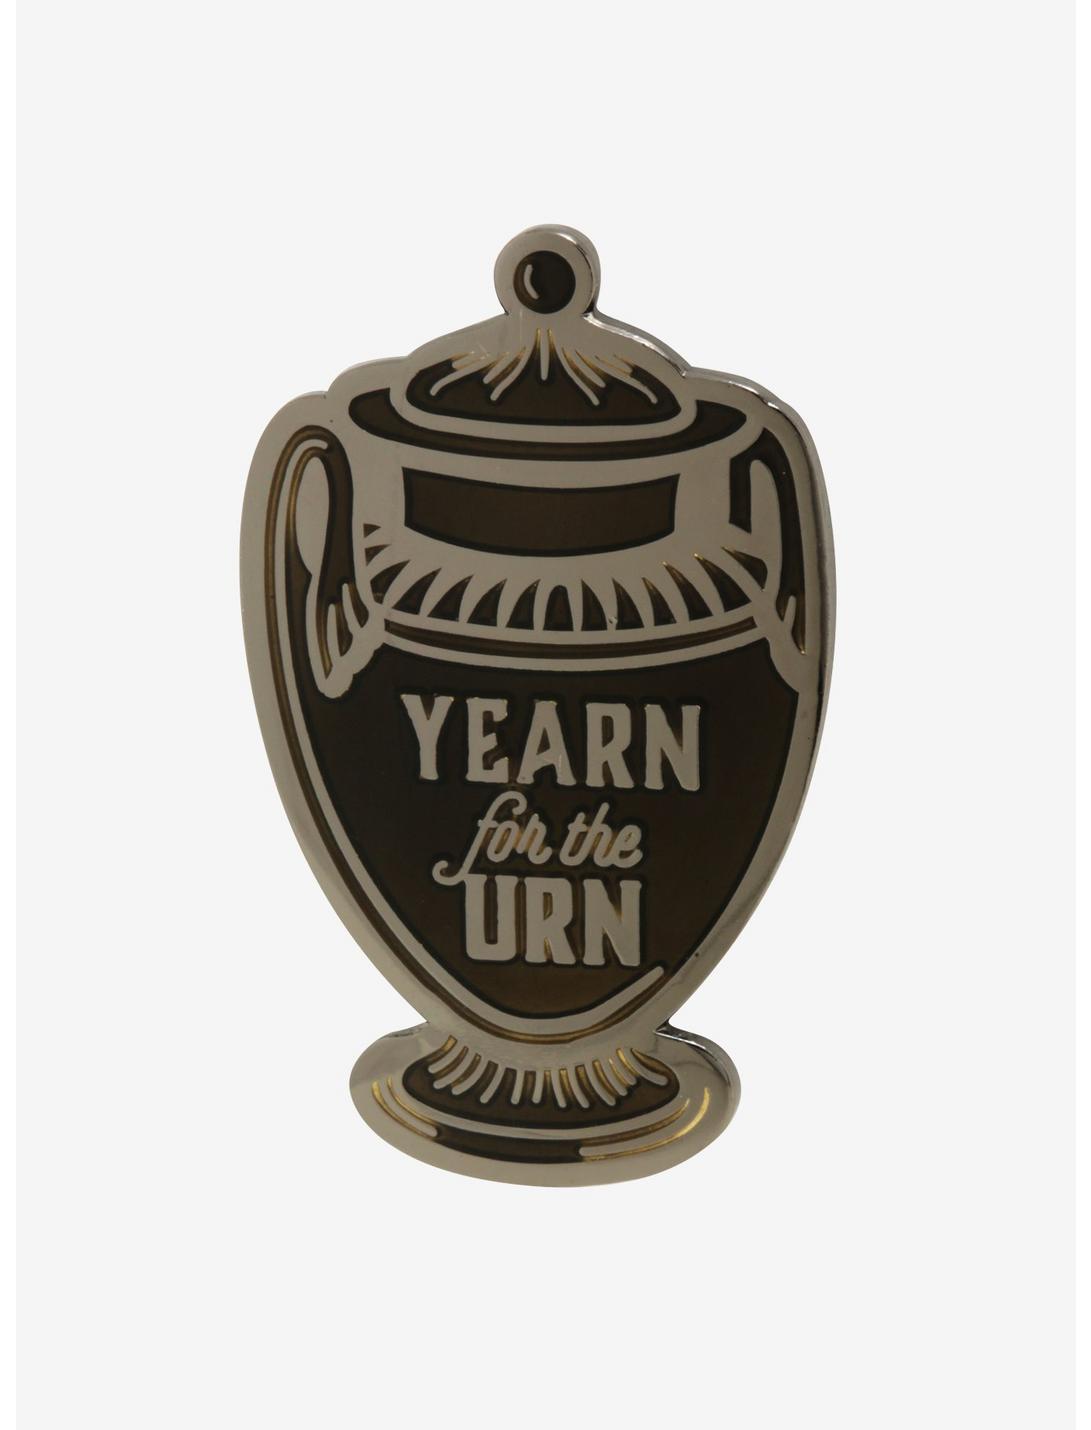 Creepy Co. Yearn For The Urn Enamel Pin, , hi-res